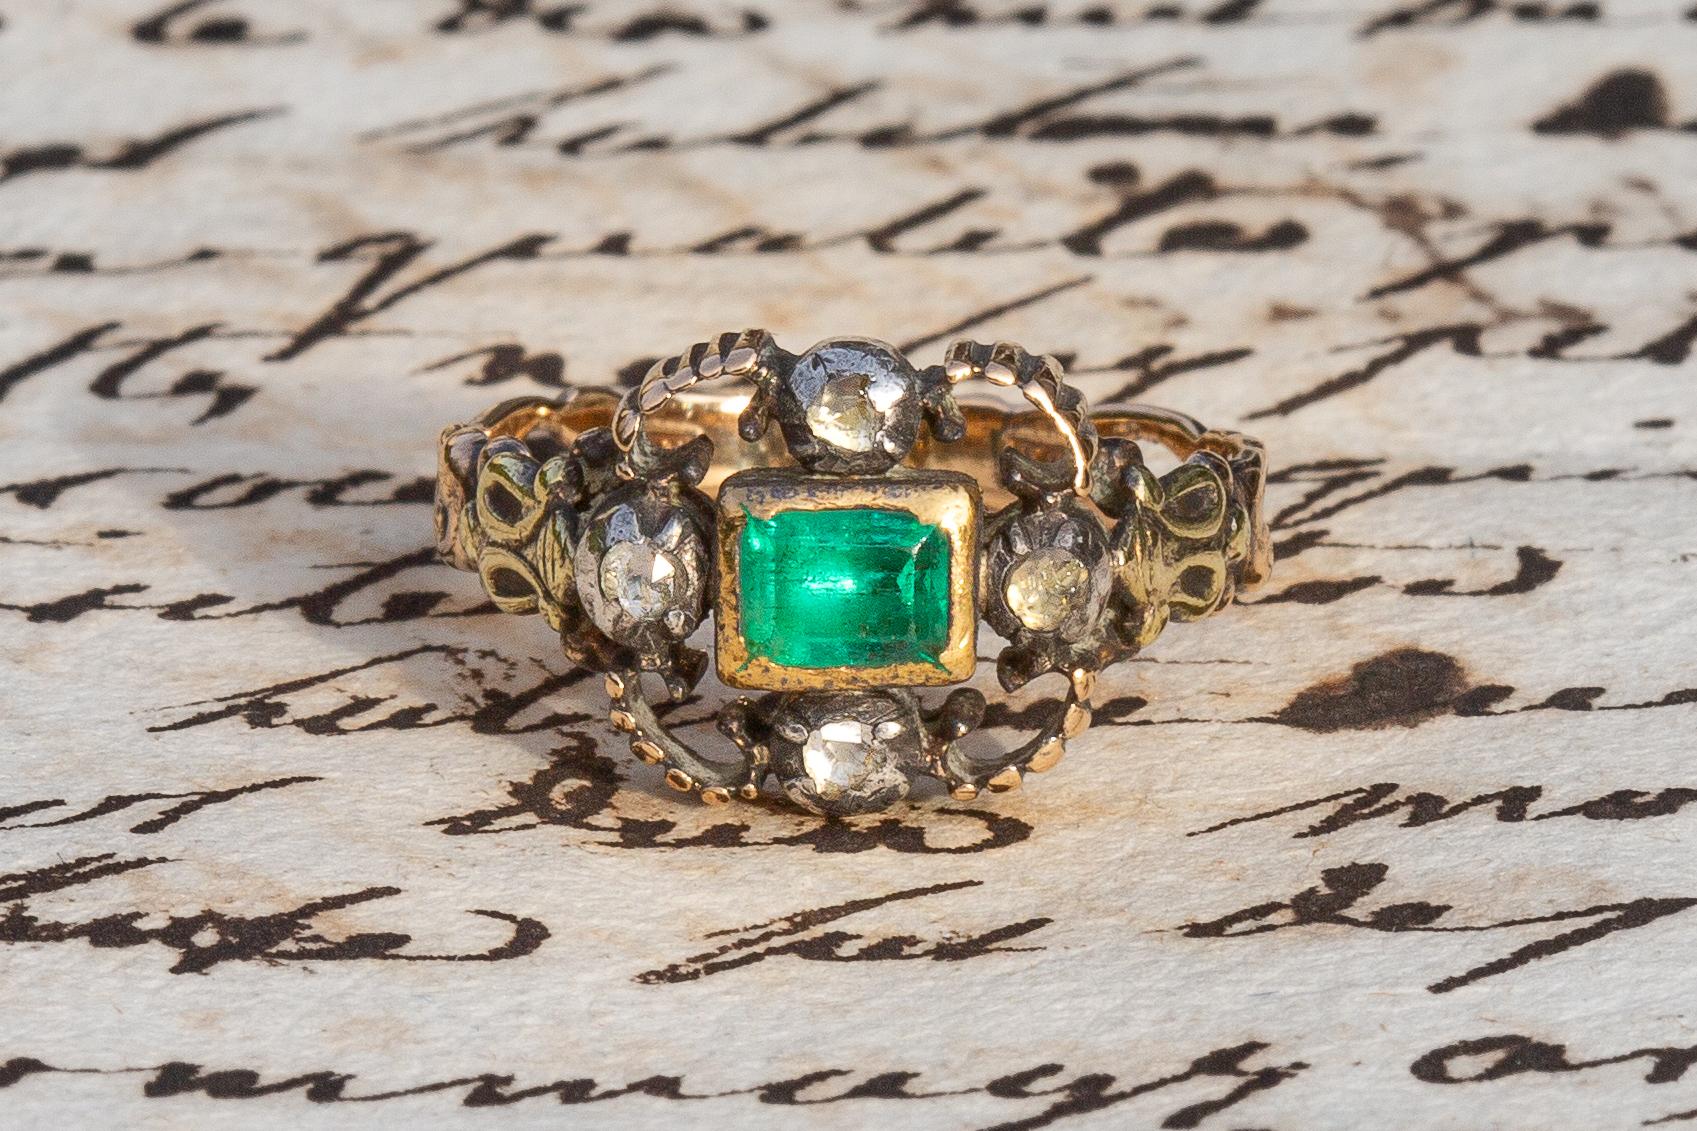 Rare Antique Late 18th Century Emerald and Diamond Ring 

This outstanding 18K gold ring dates to the late 18th century, circa 1780 and was made in Western Europe. A table cut natural emerald, likely to be of Columbian origin, is mounted in a gold